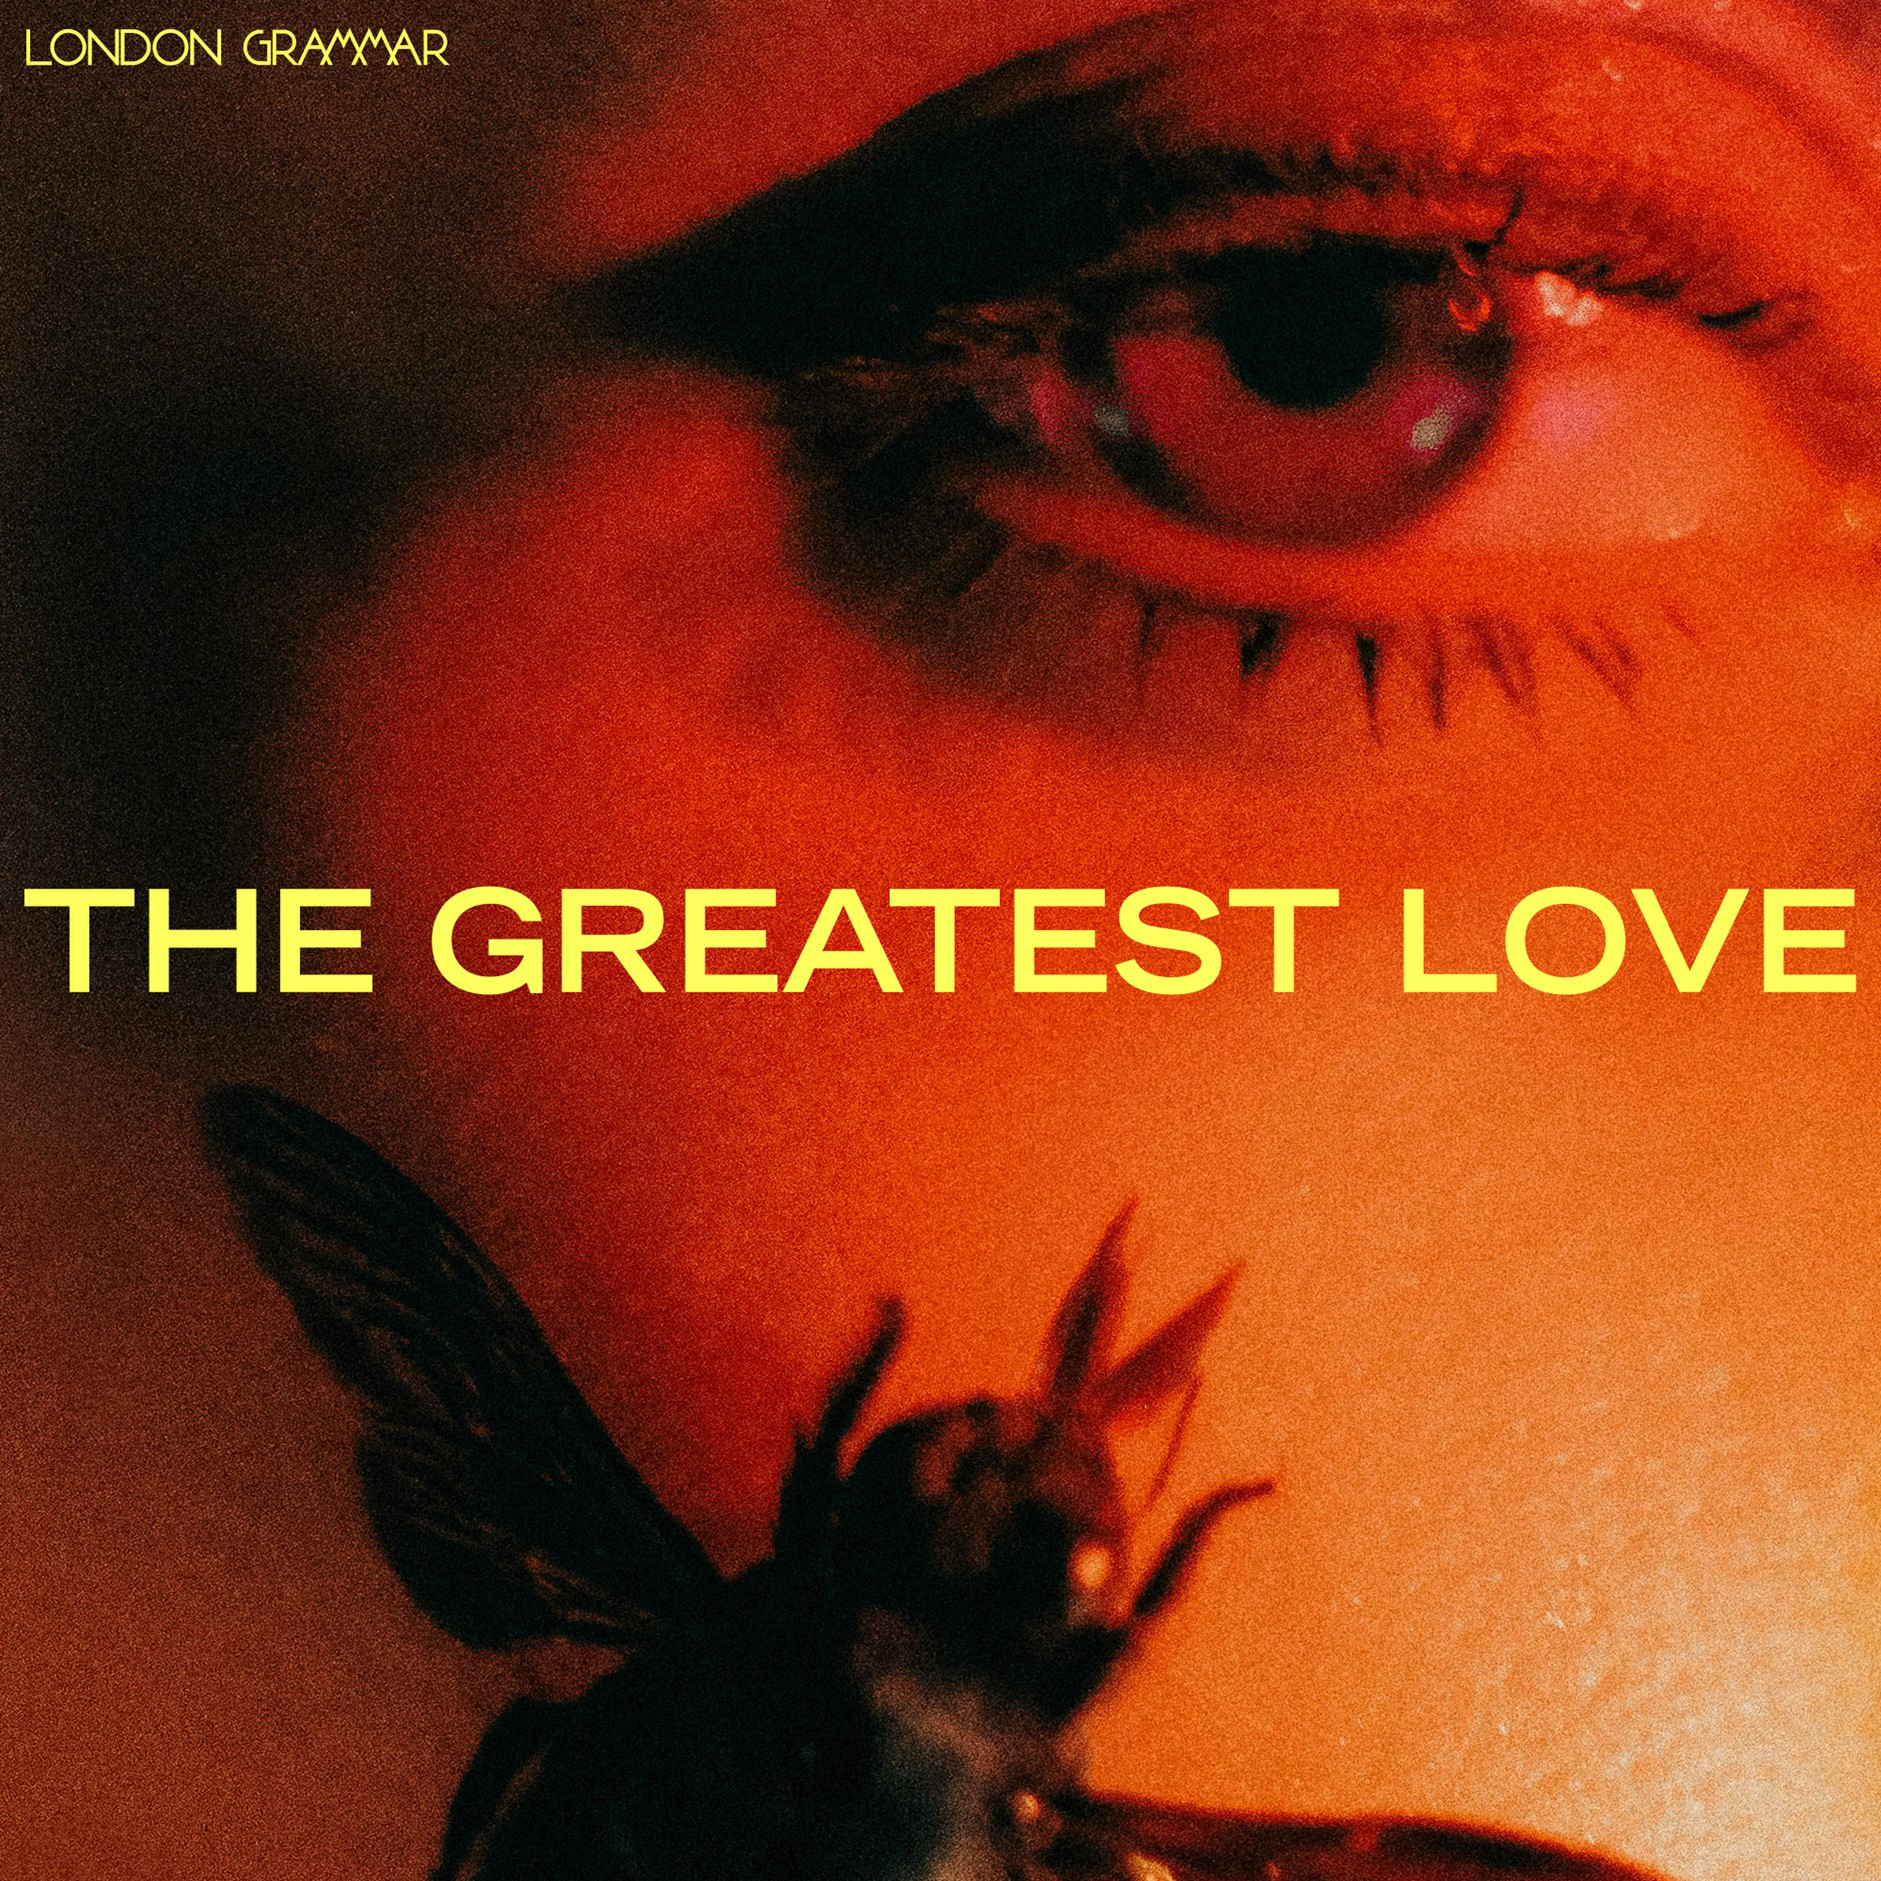 London Grammar - The Greatest Love: Deluxe Hardcover Book Set